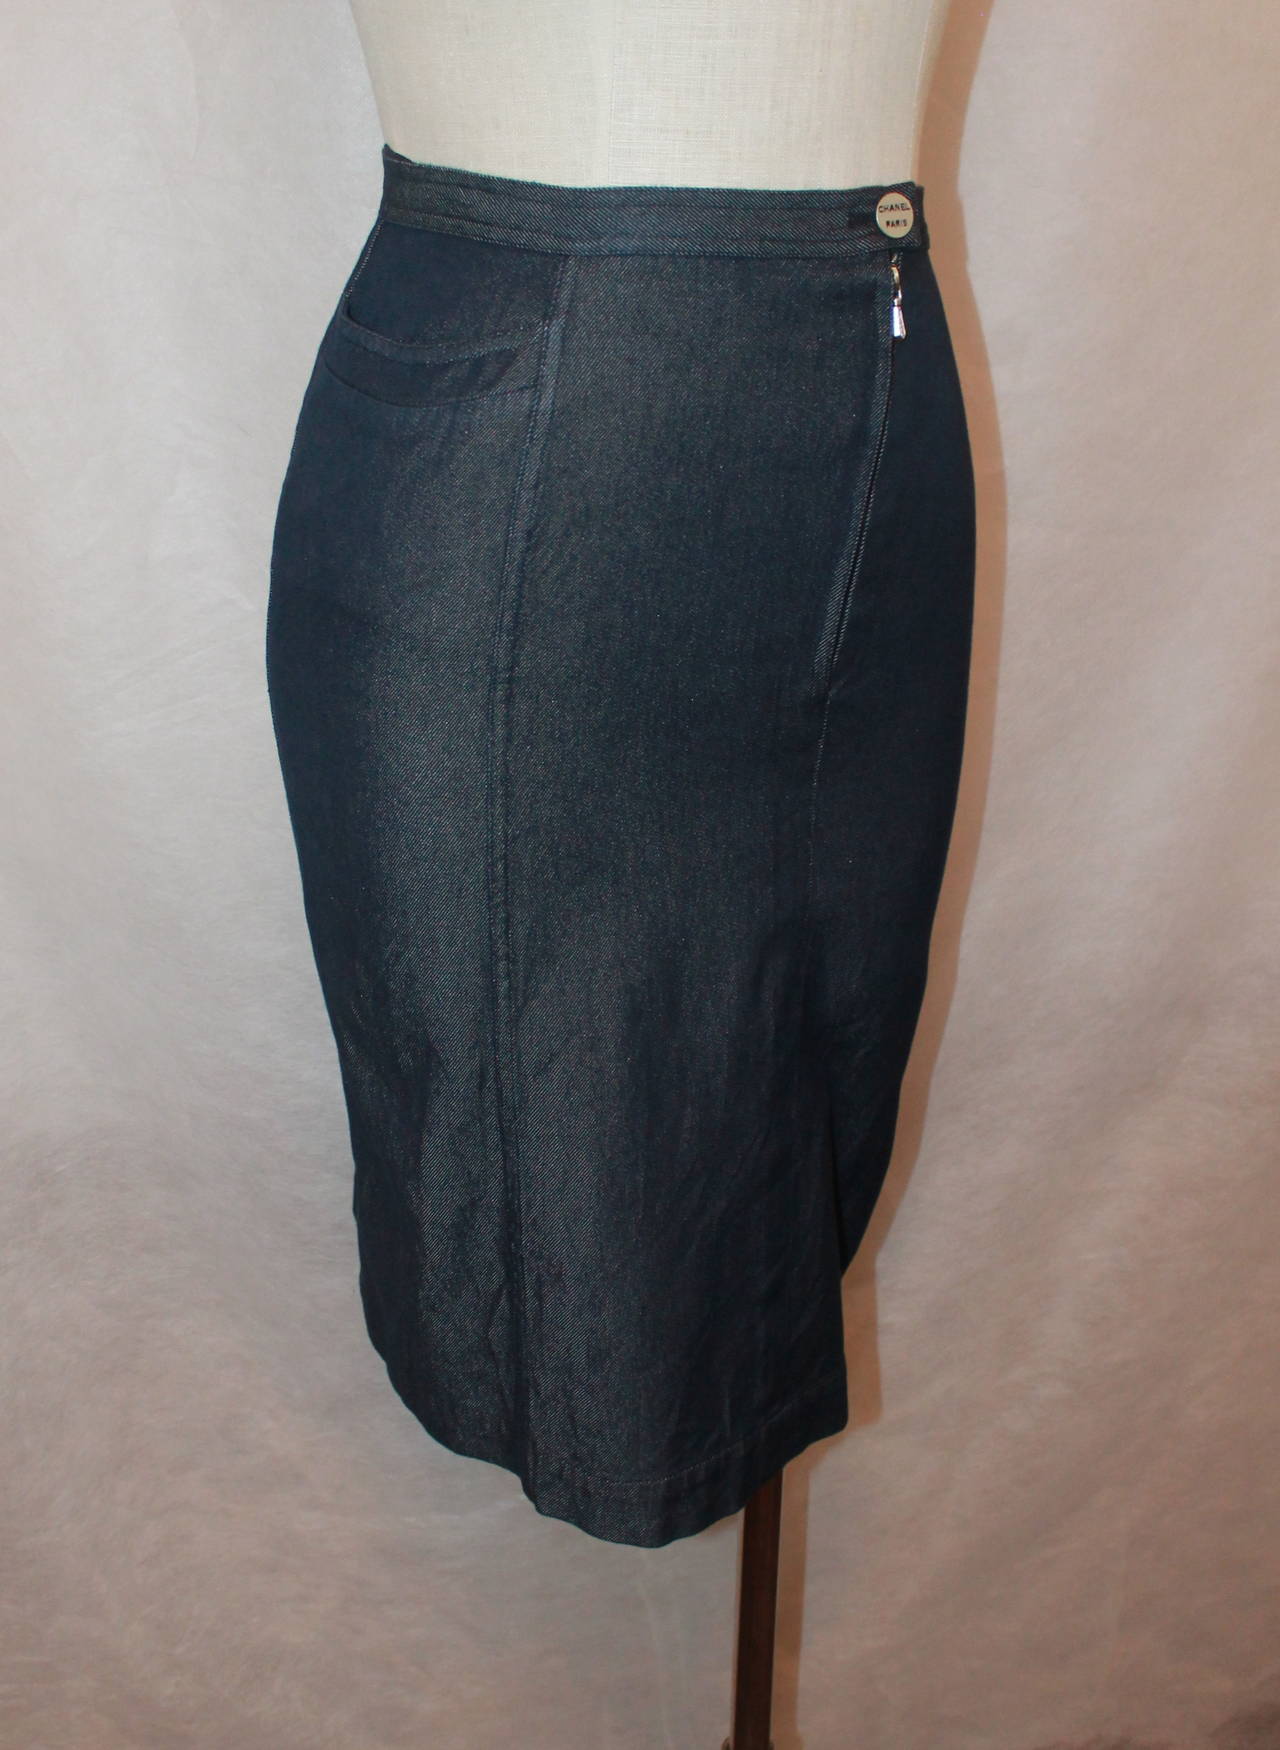 Chanel 2000 Denim Pencil Skirt - 36. This skirt is in excellent condition and has 1 side pocket. The zipper is not centered.

Measurements:
Waist- 25